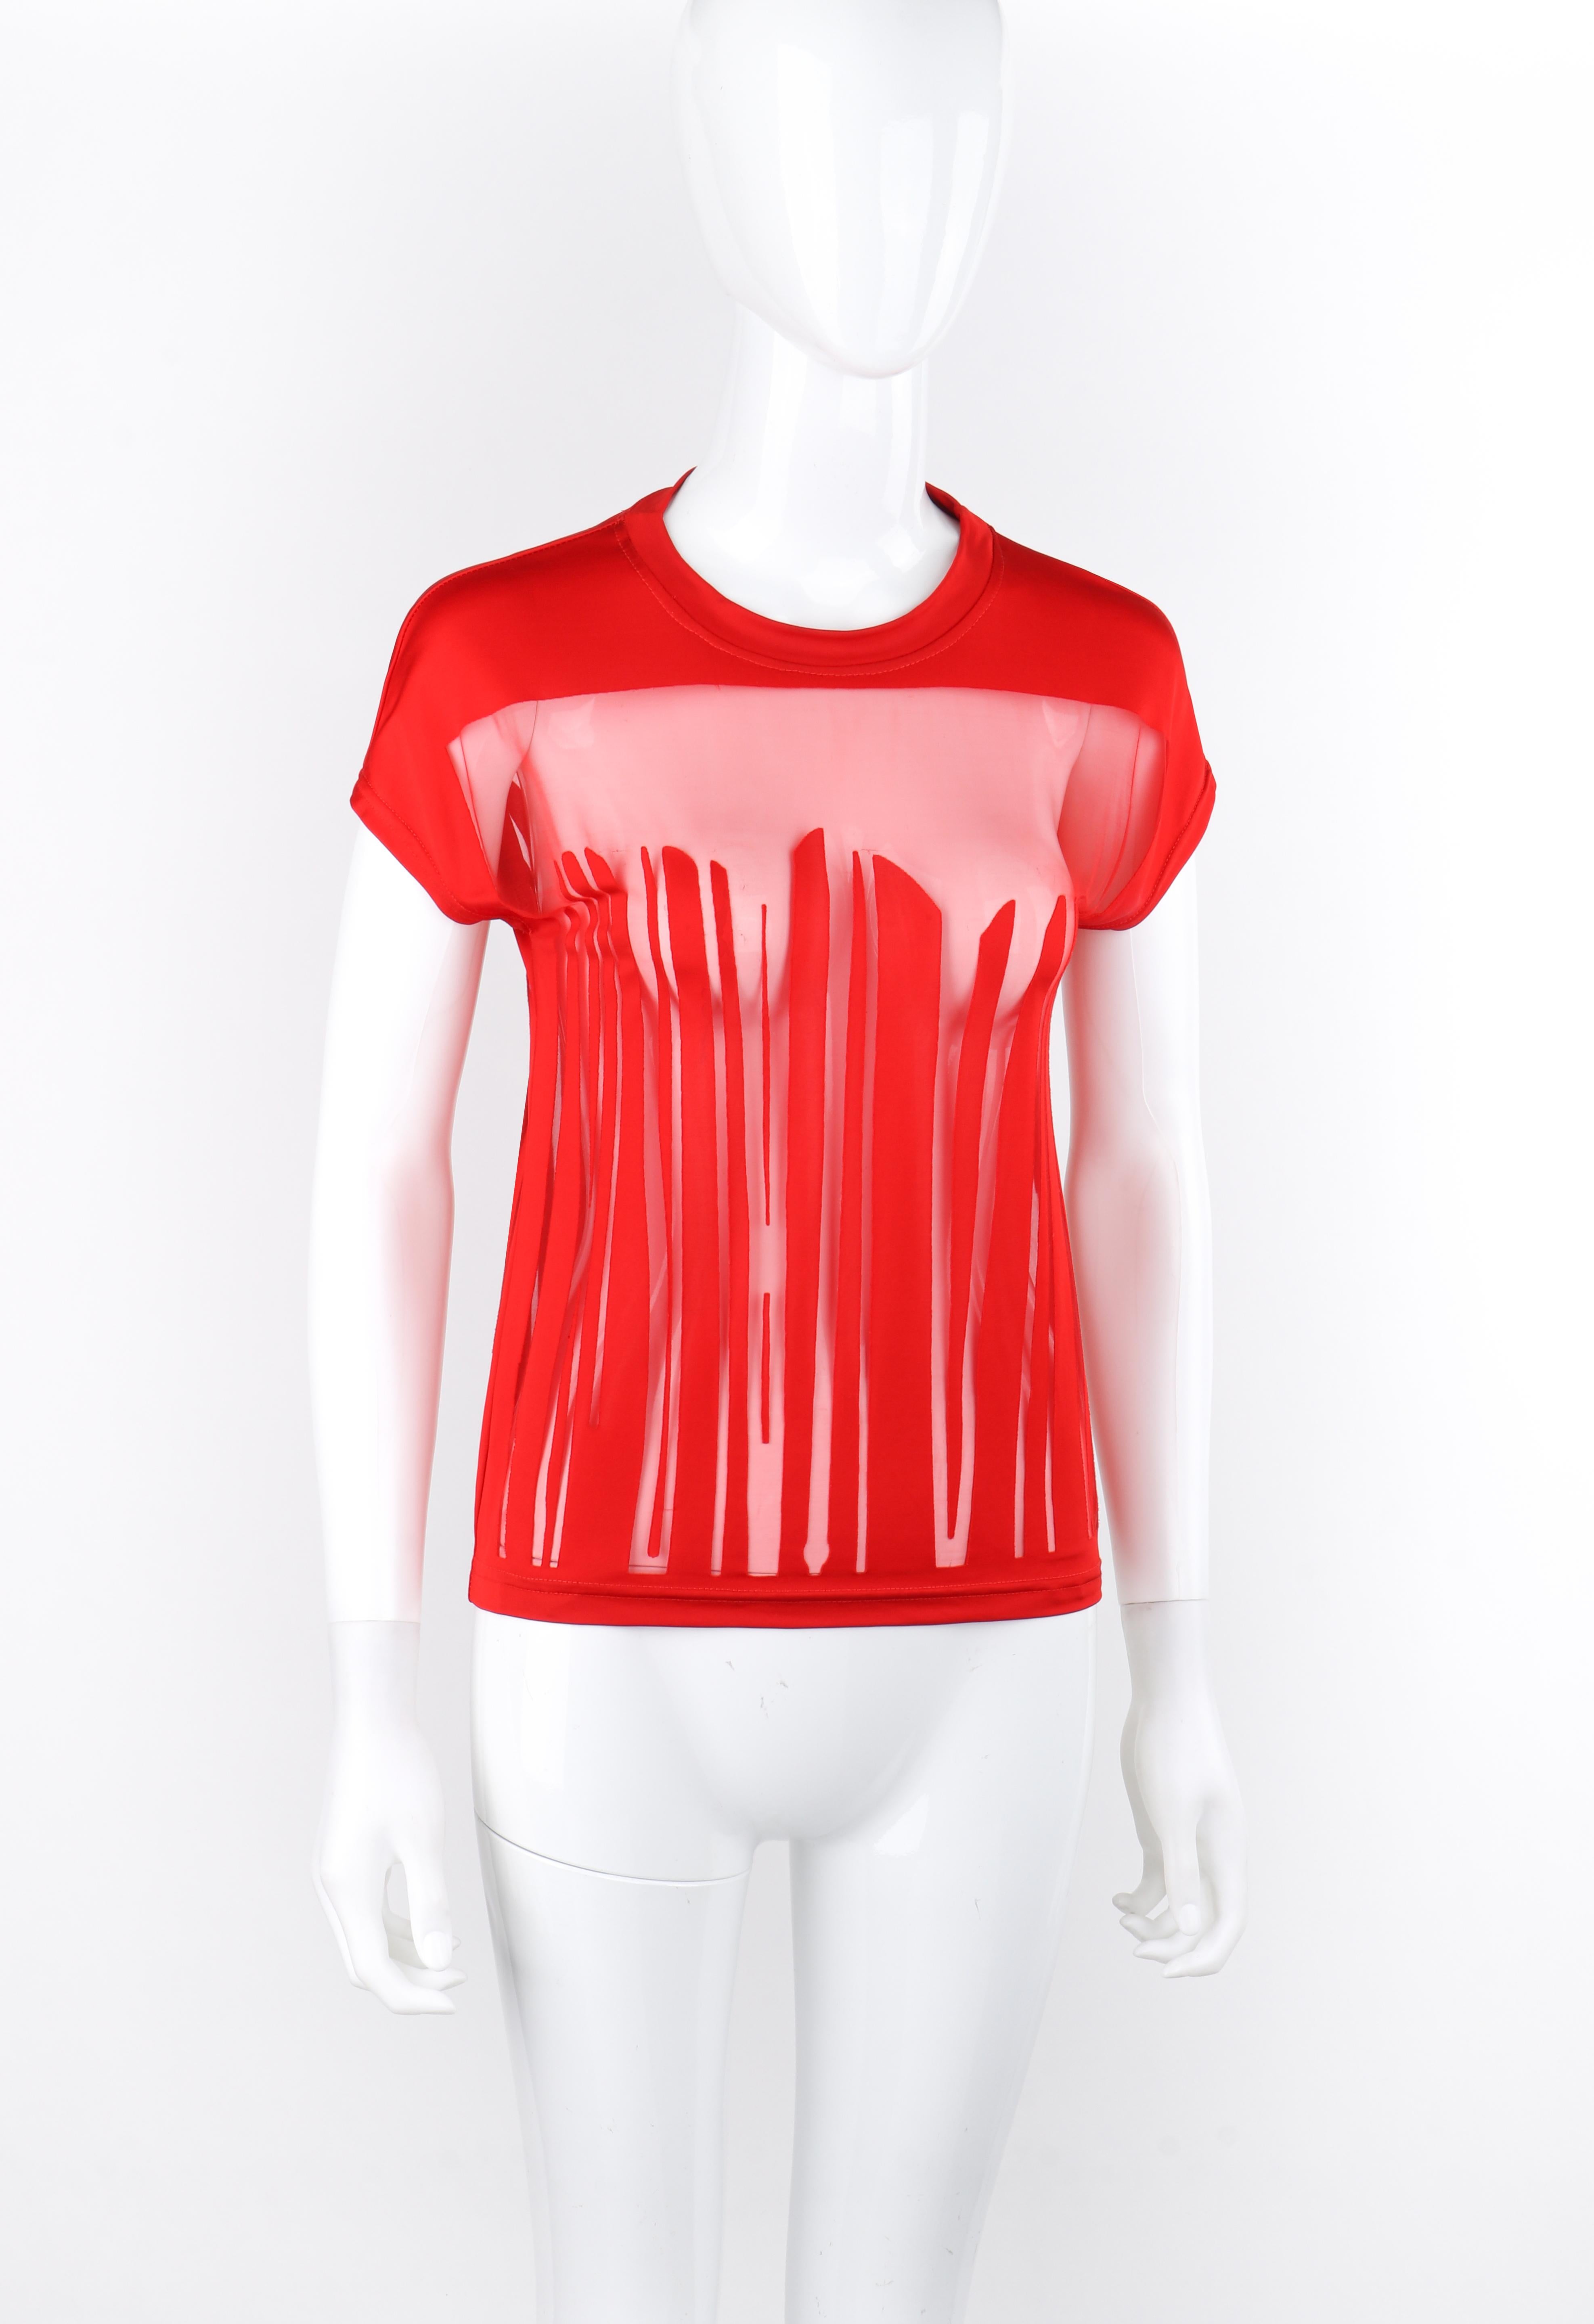 ALEXANDER McQUEEN S/S 1996 Red Semi Sheer Mesh Short Sleeve Shell Top In Good Condition For Sale In Thiensville, WI